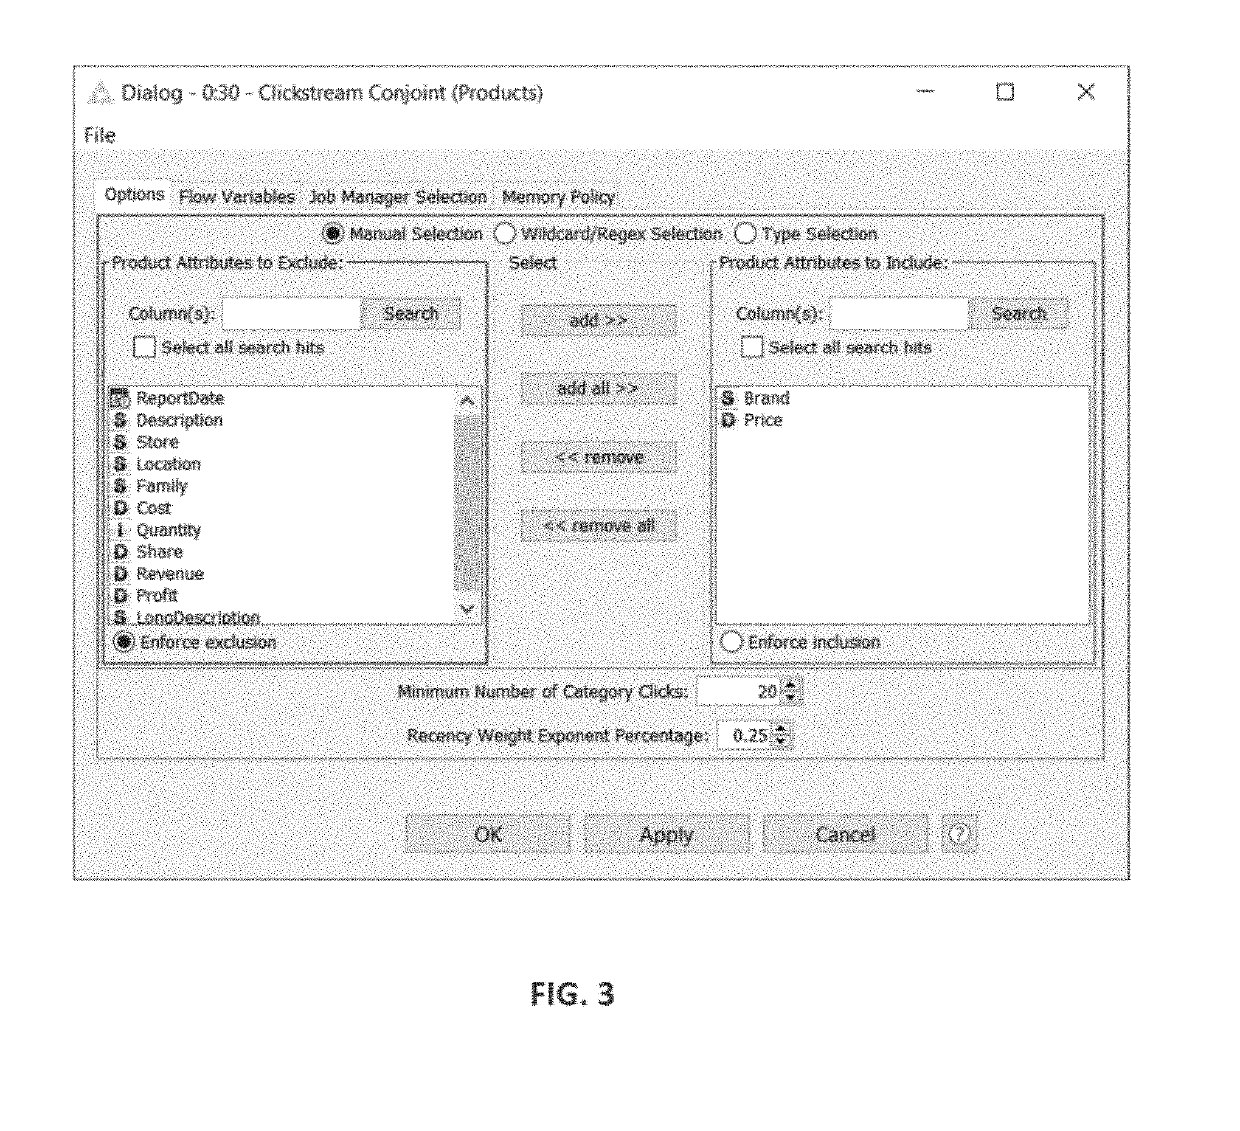 Method for applying conjoint analysis to rank customer product preference